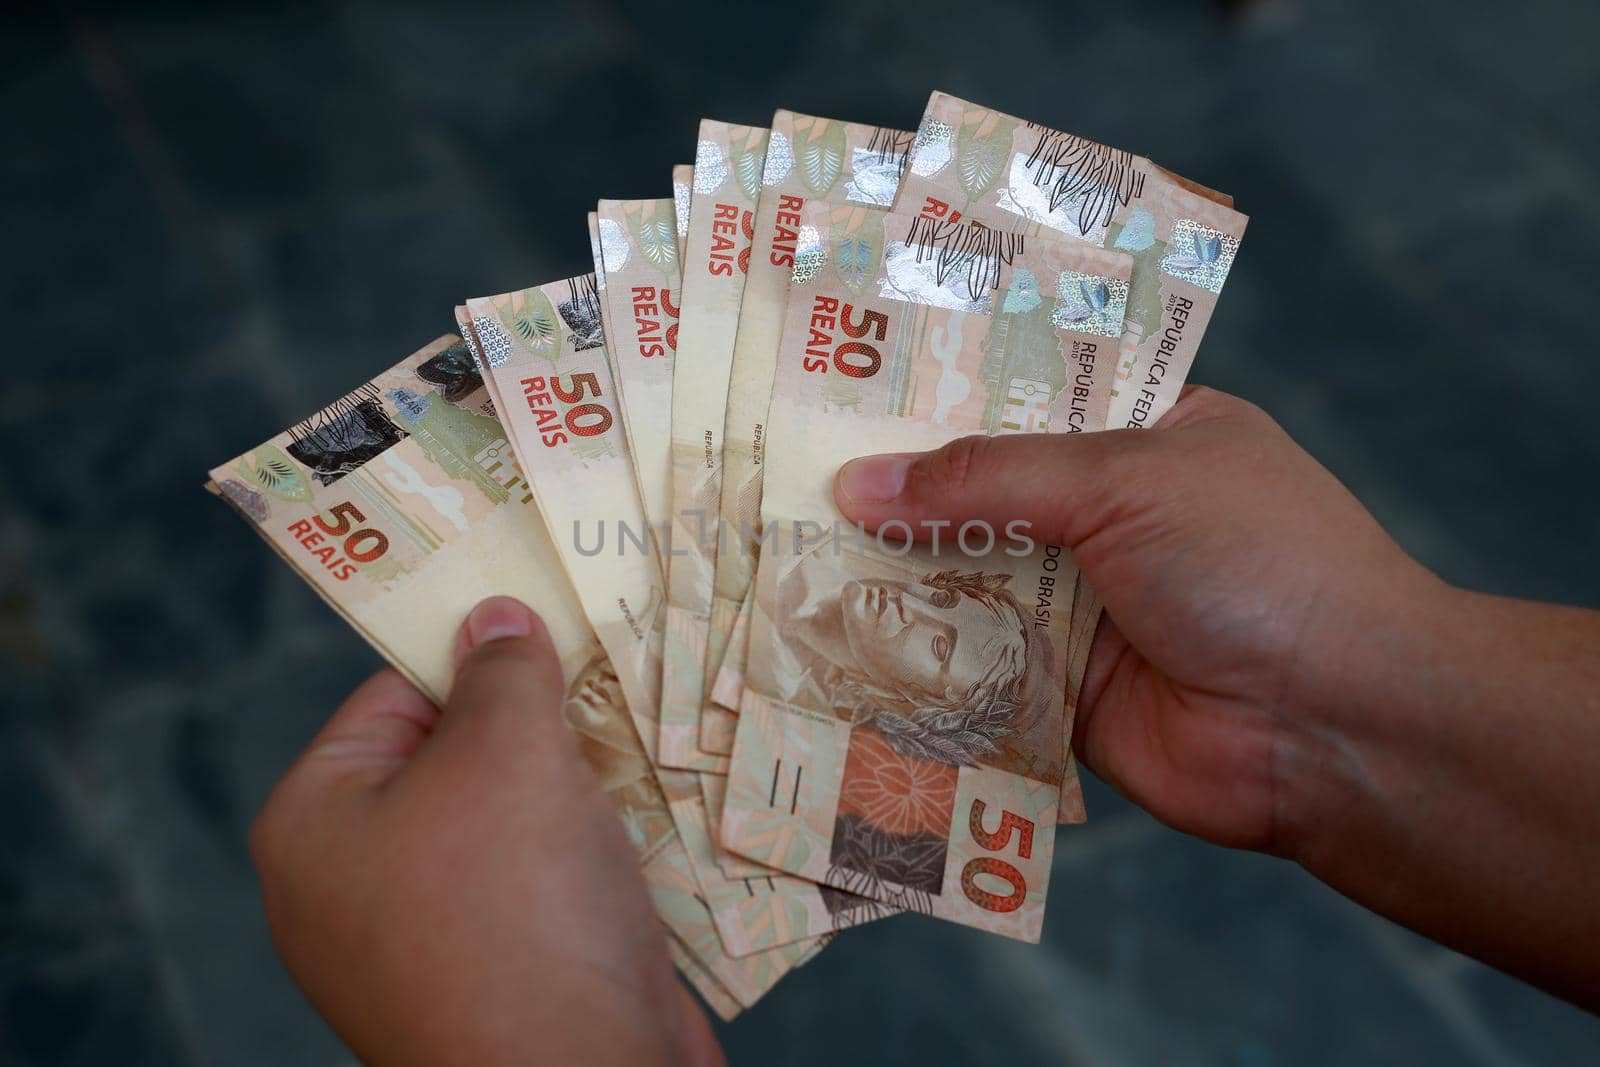 salvador, bahia / brazil - february 25, 2015: Hands hold fifty reais banknotes during counting. R$ 50.

